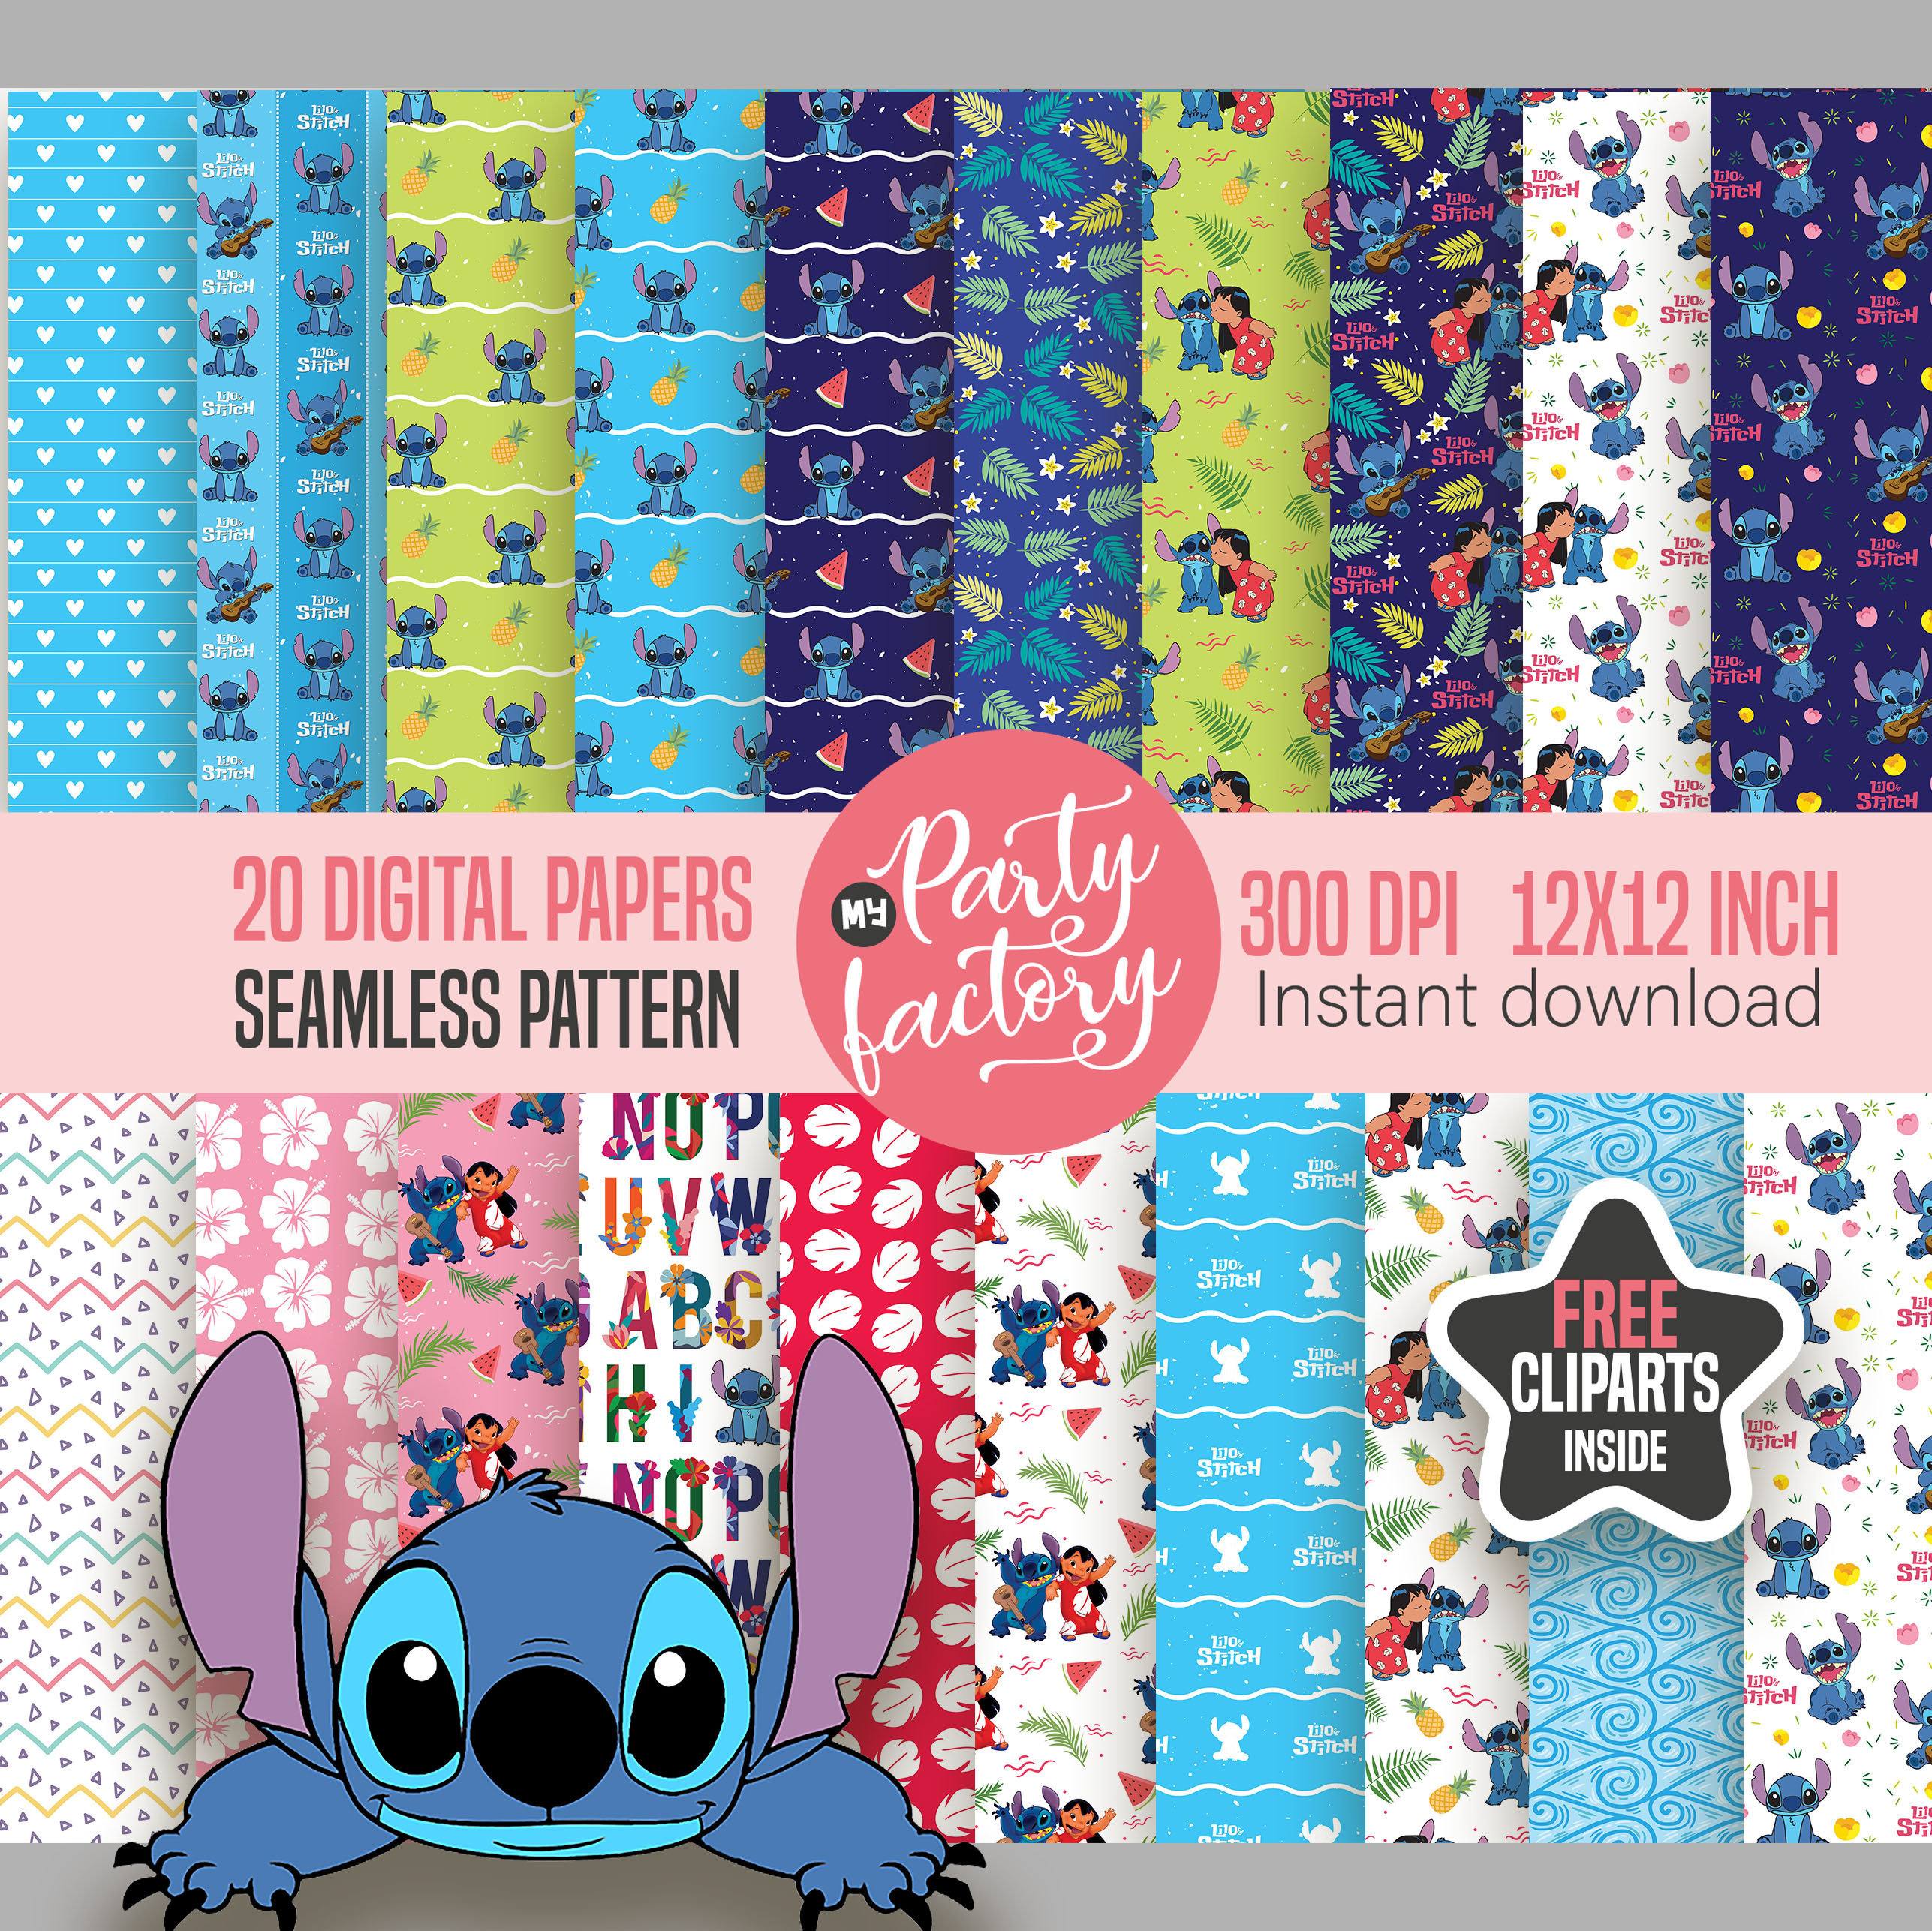 Stitch Bookmark Gifts, Just A Girl Who Loves Stitch, Stitch Gifts for Girls  Stitch Stuff Stitch Birthday Christmas Gifts for Daughter Friends Sister